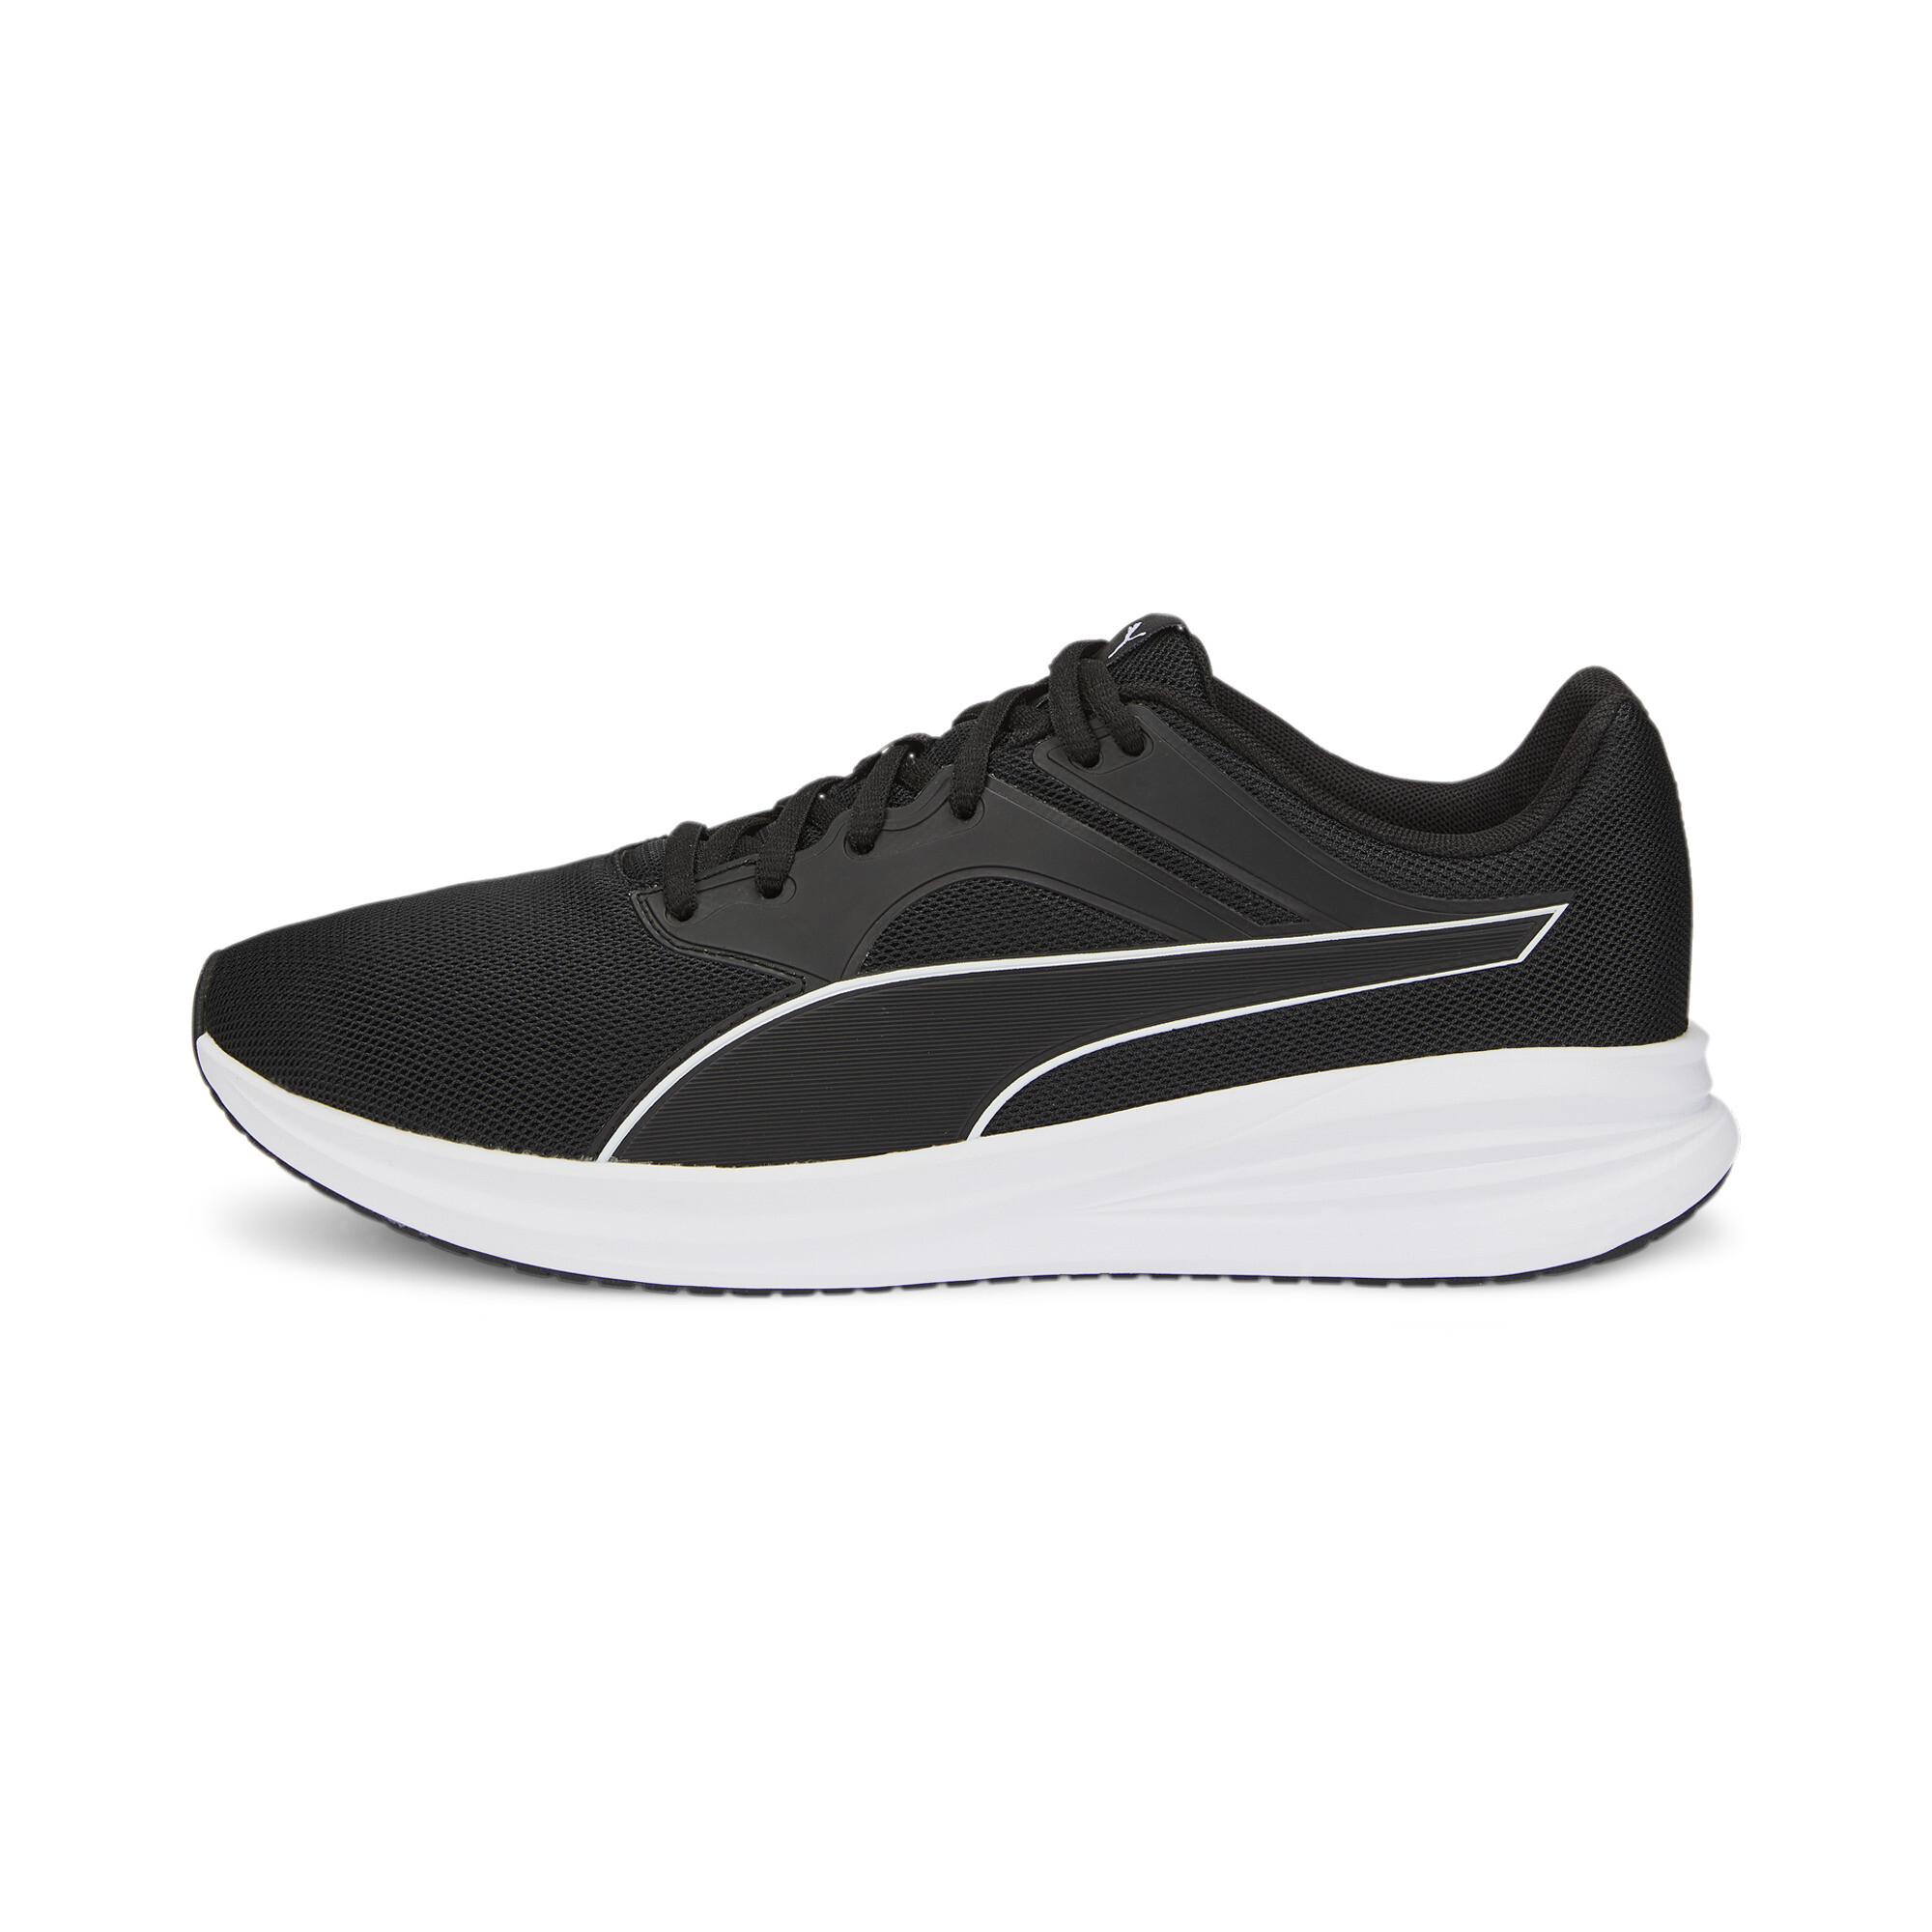 Puma Transport Running Shoes, Black, Size 43, Shoes